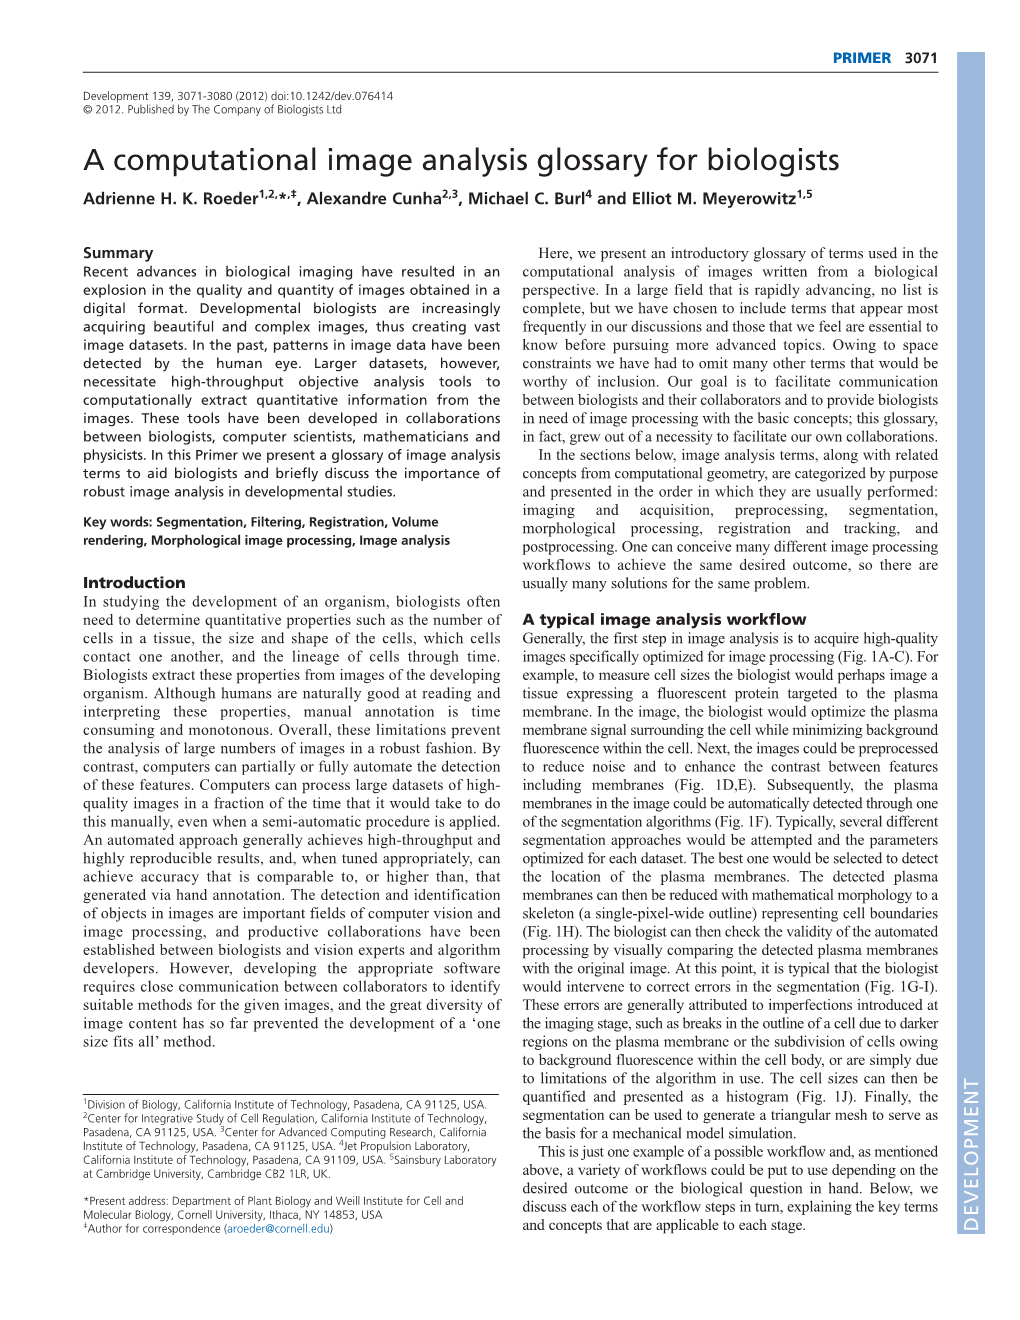 A Computational Image Analysis Glossary for Biologists Adrienne H